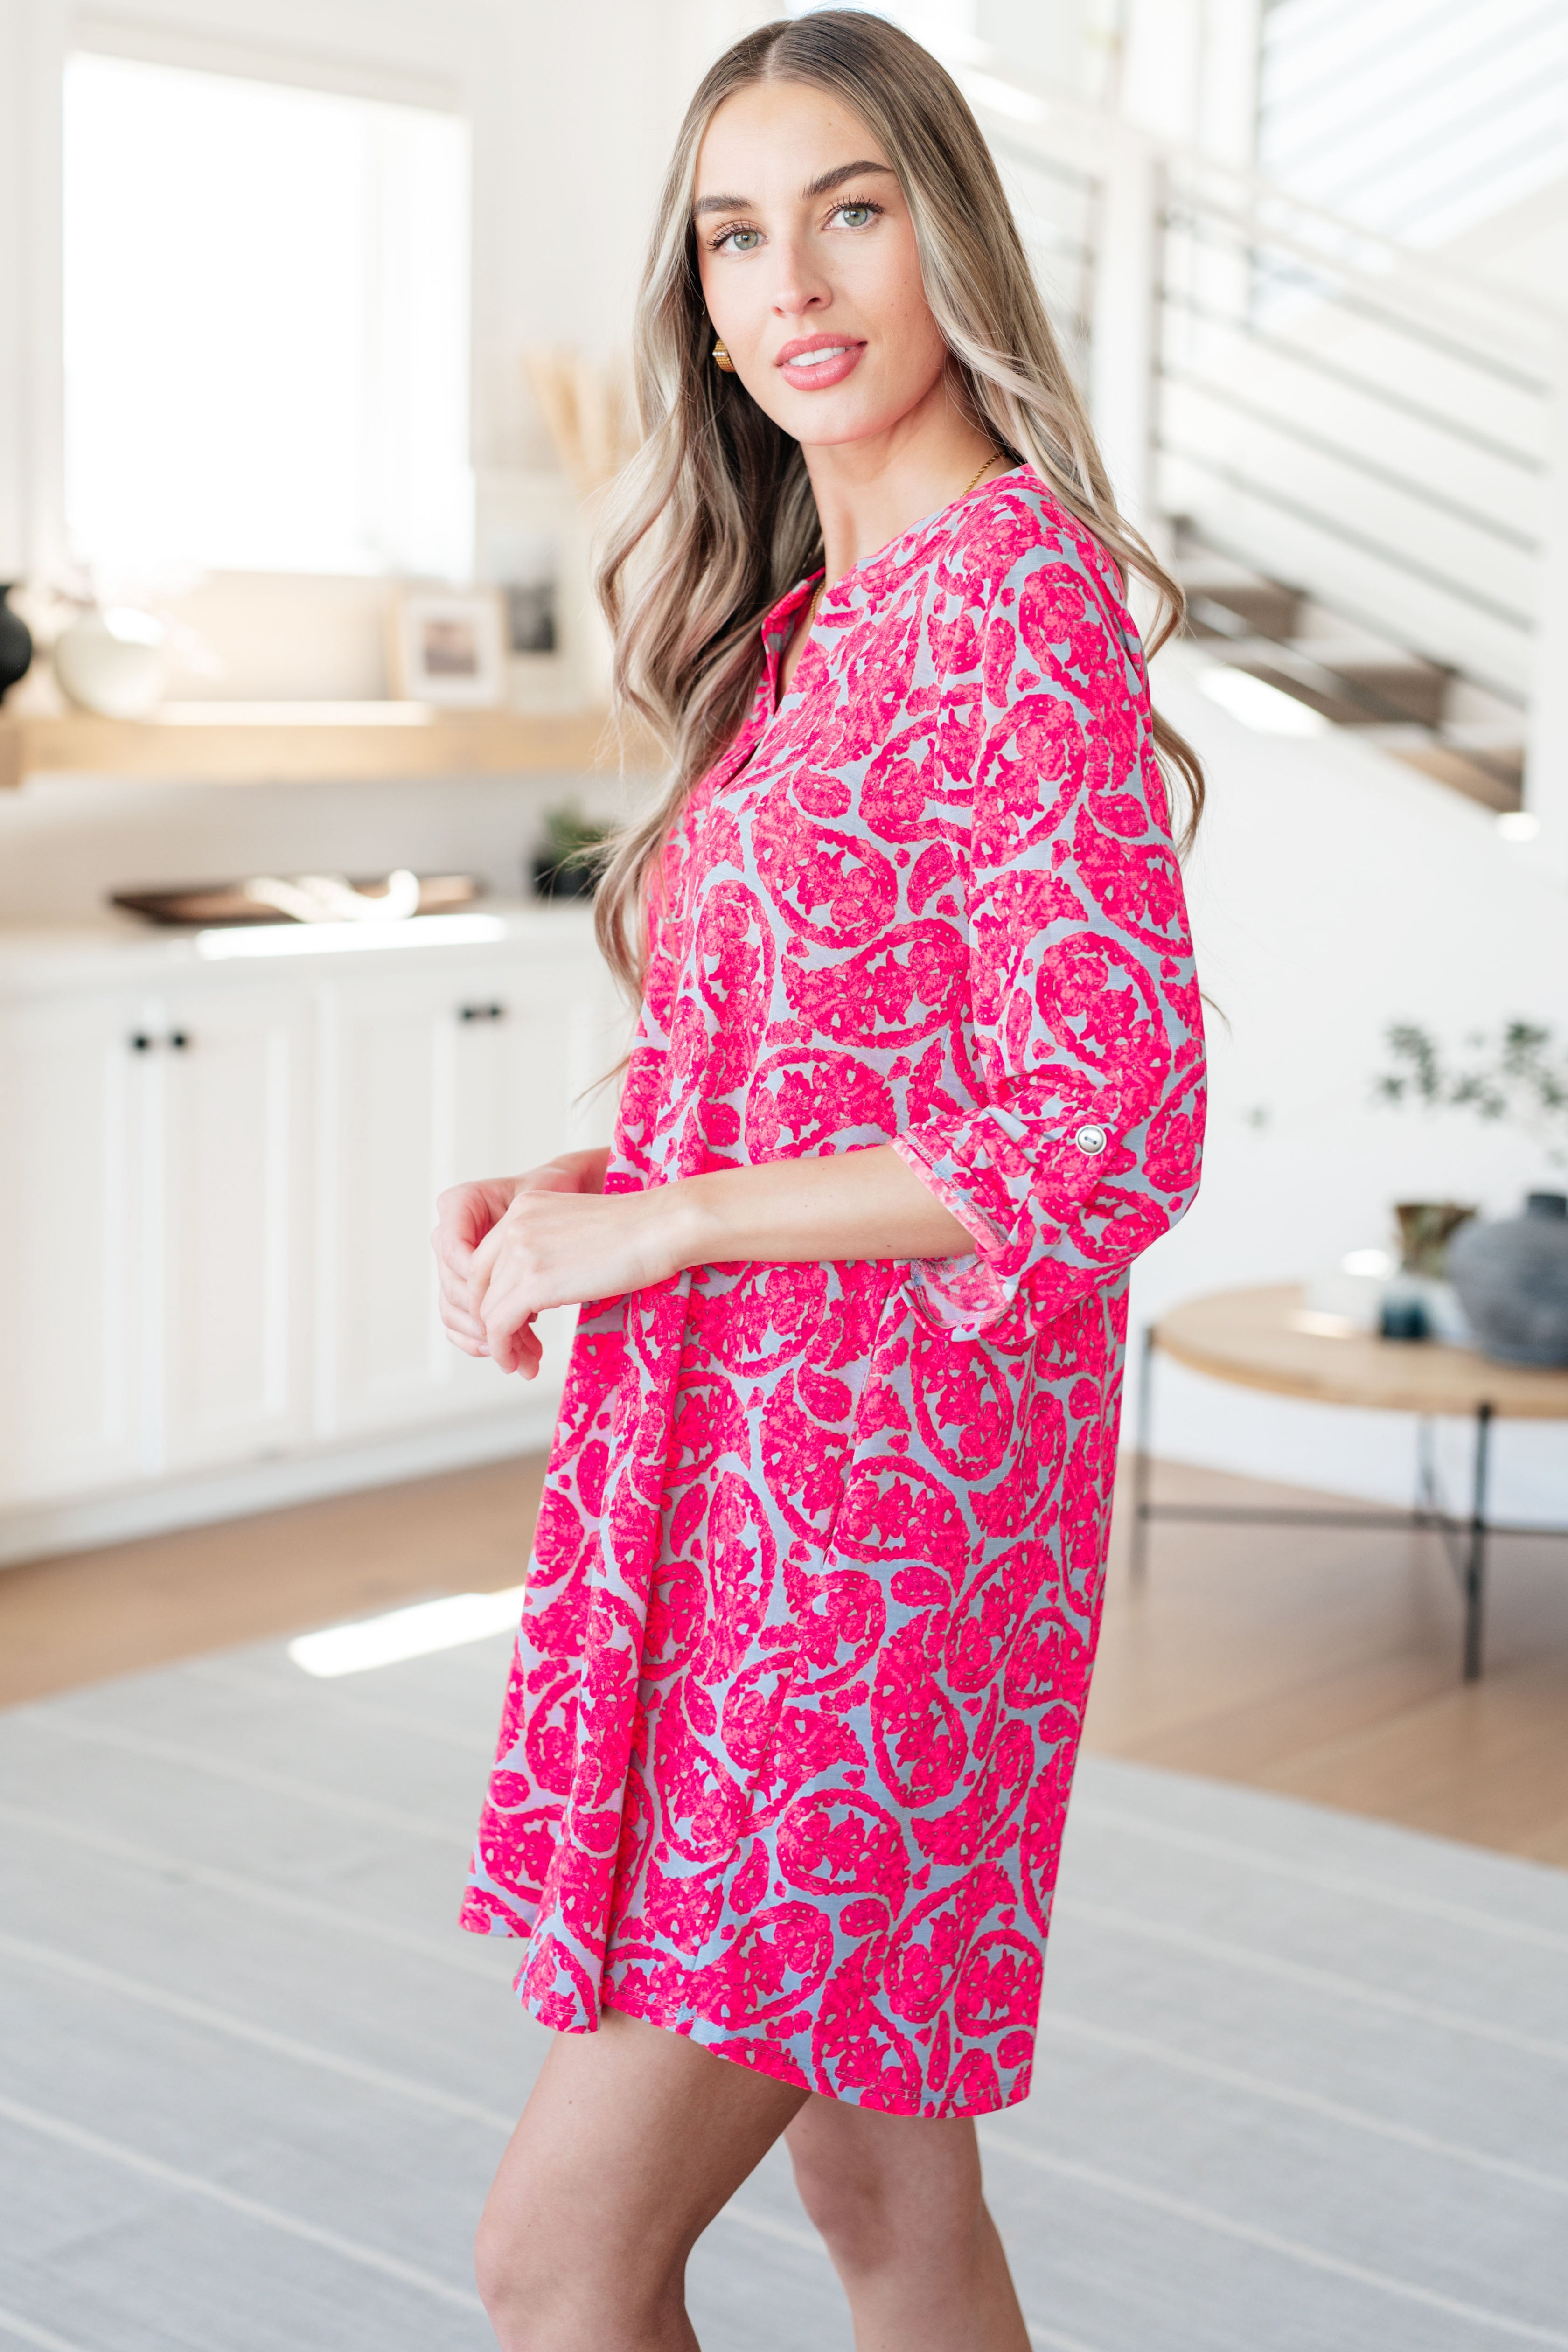 Lizzy Dress in Grey and Pink Paisley Dresses Ave Shops   